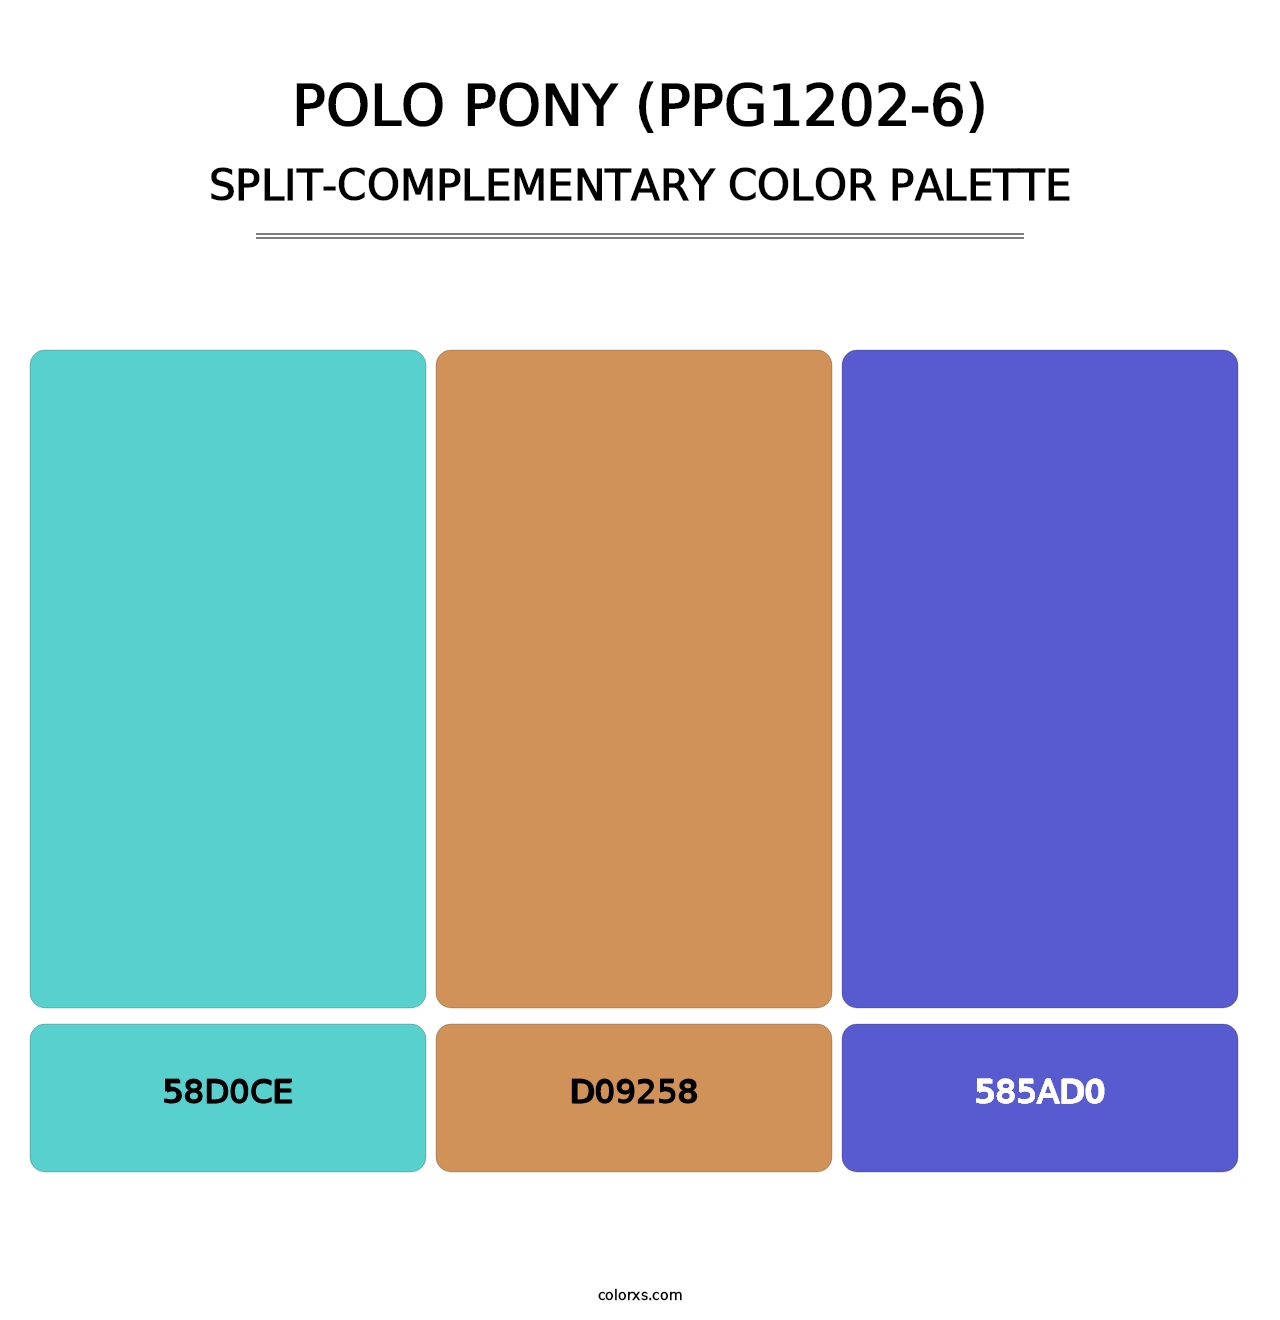 Polo Pony (PPG1202-6) - Split-Complementary Color Palette